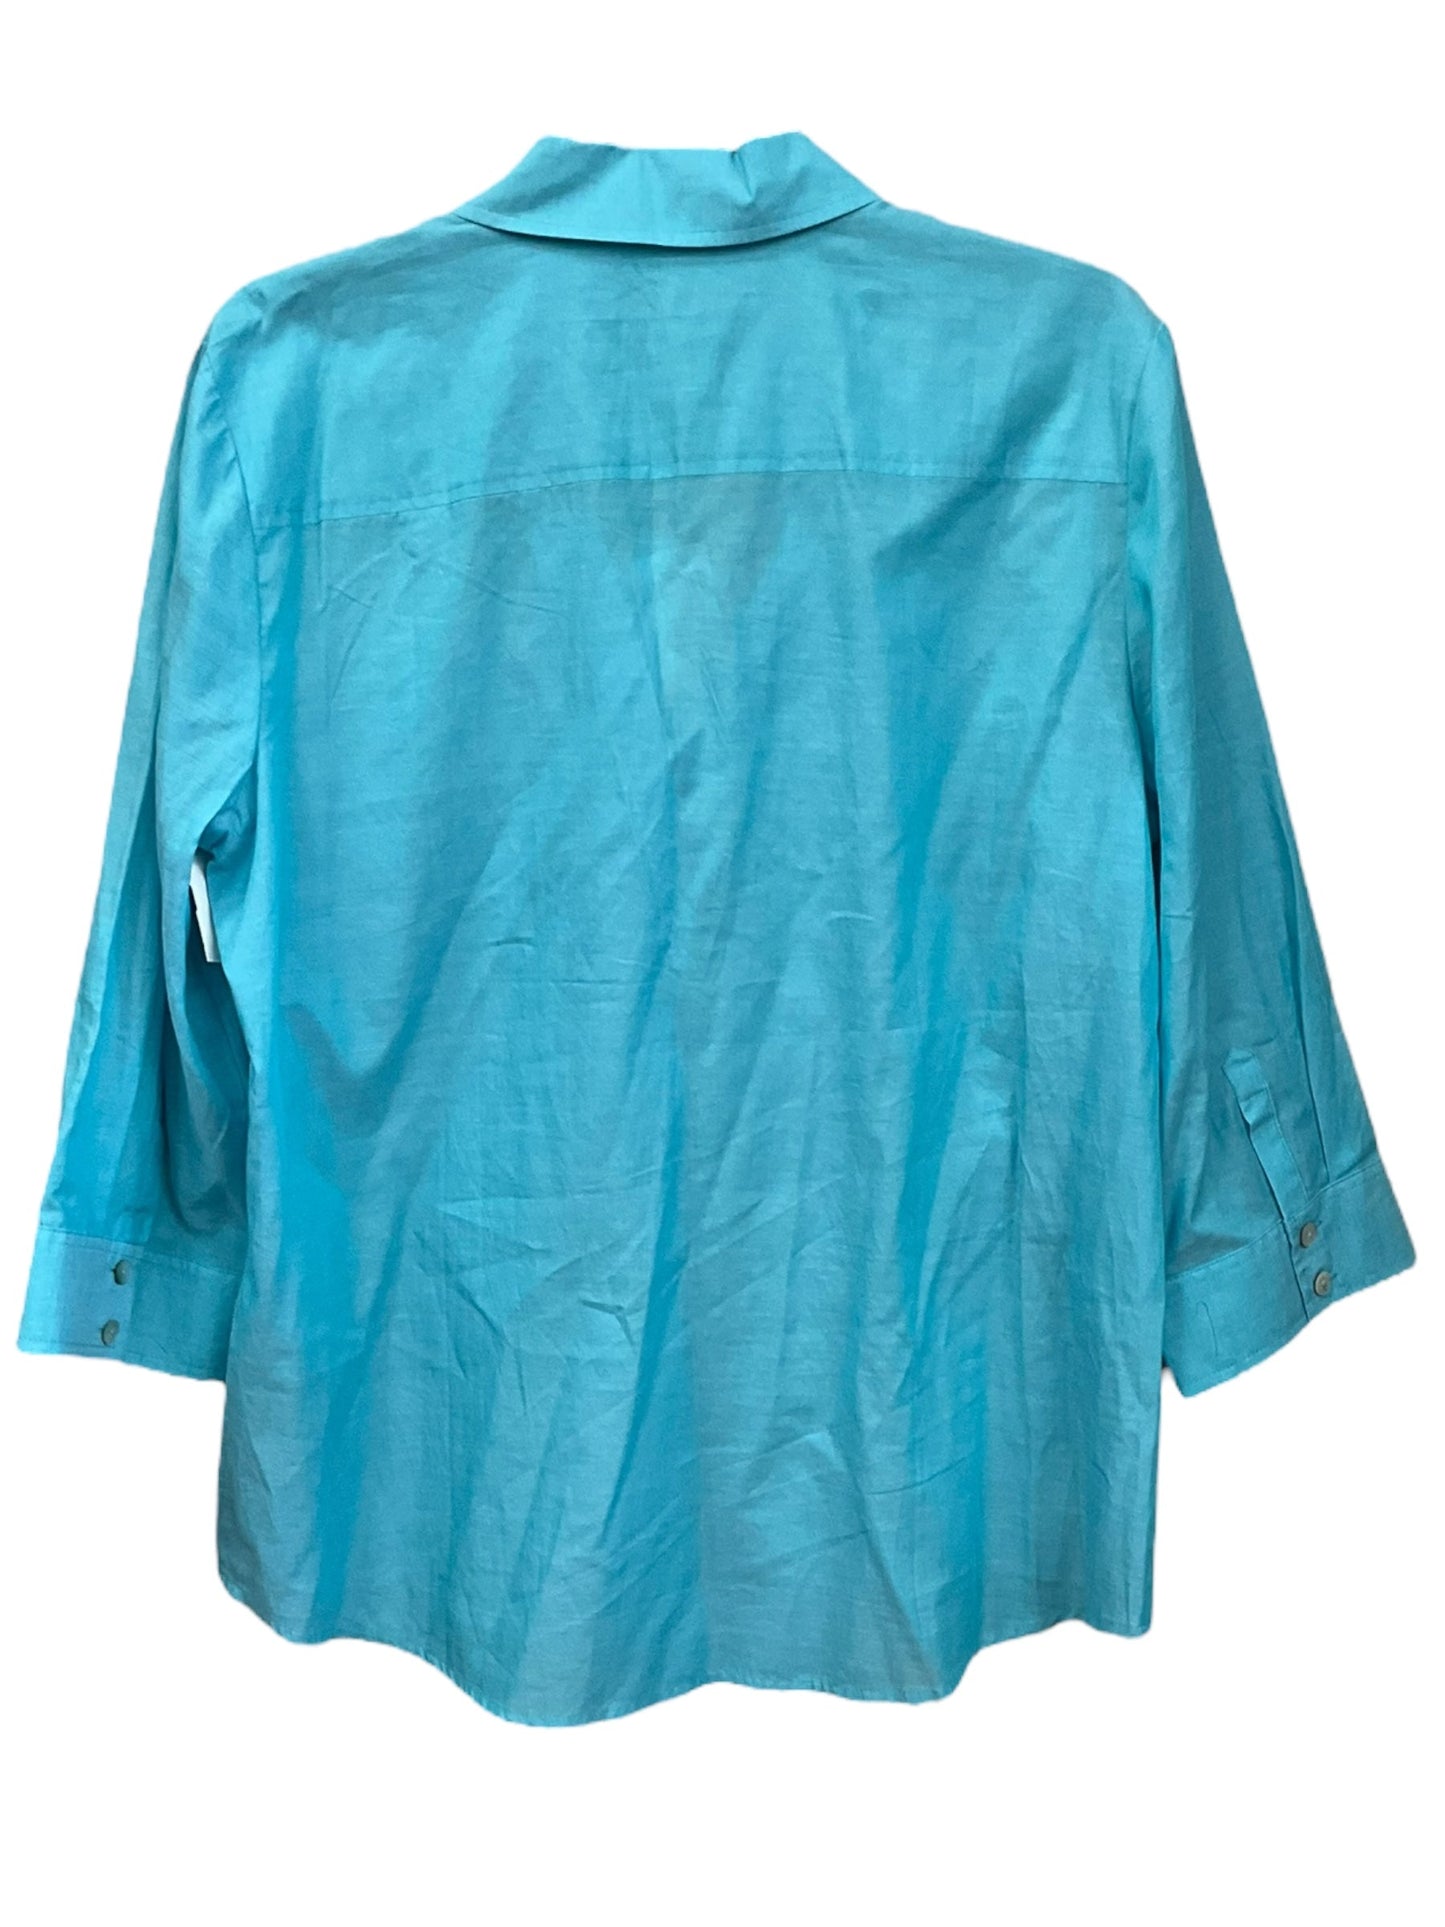 Blue Blouse 3/4 Sleeve Chicos, Size 2x